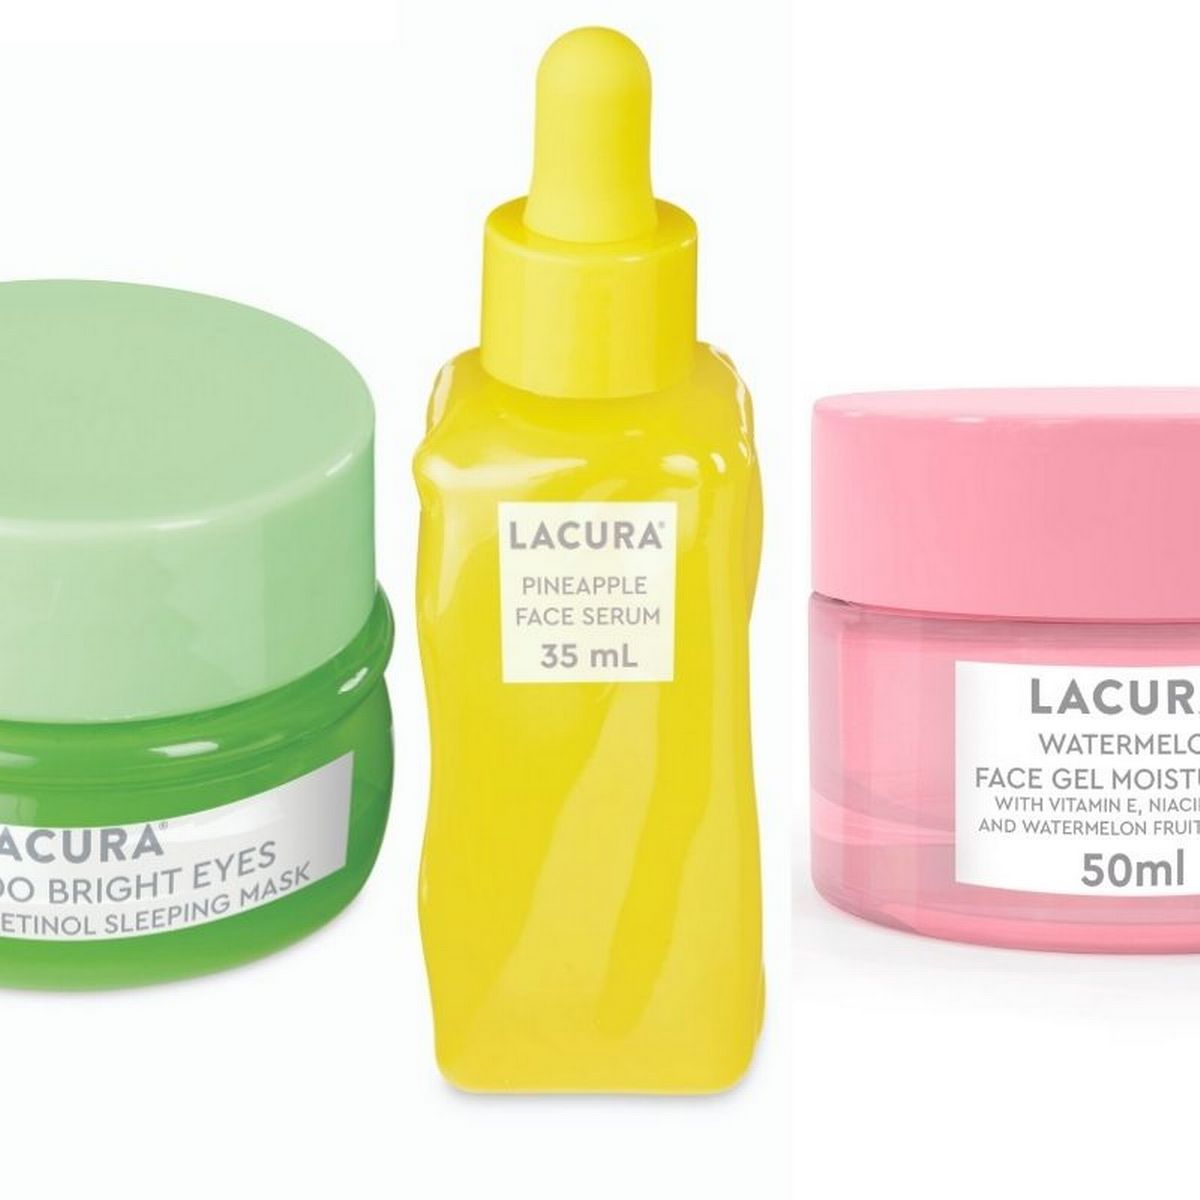 Lacura Skincare Aldi Beauty Dupes, does it live up to the hype?